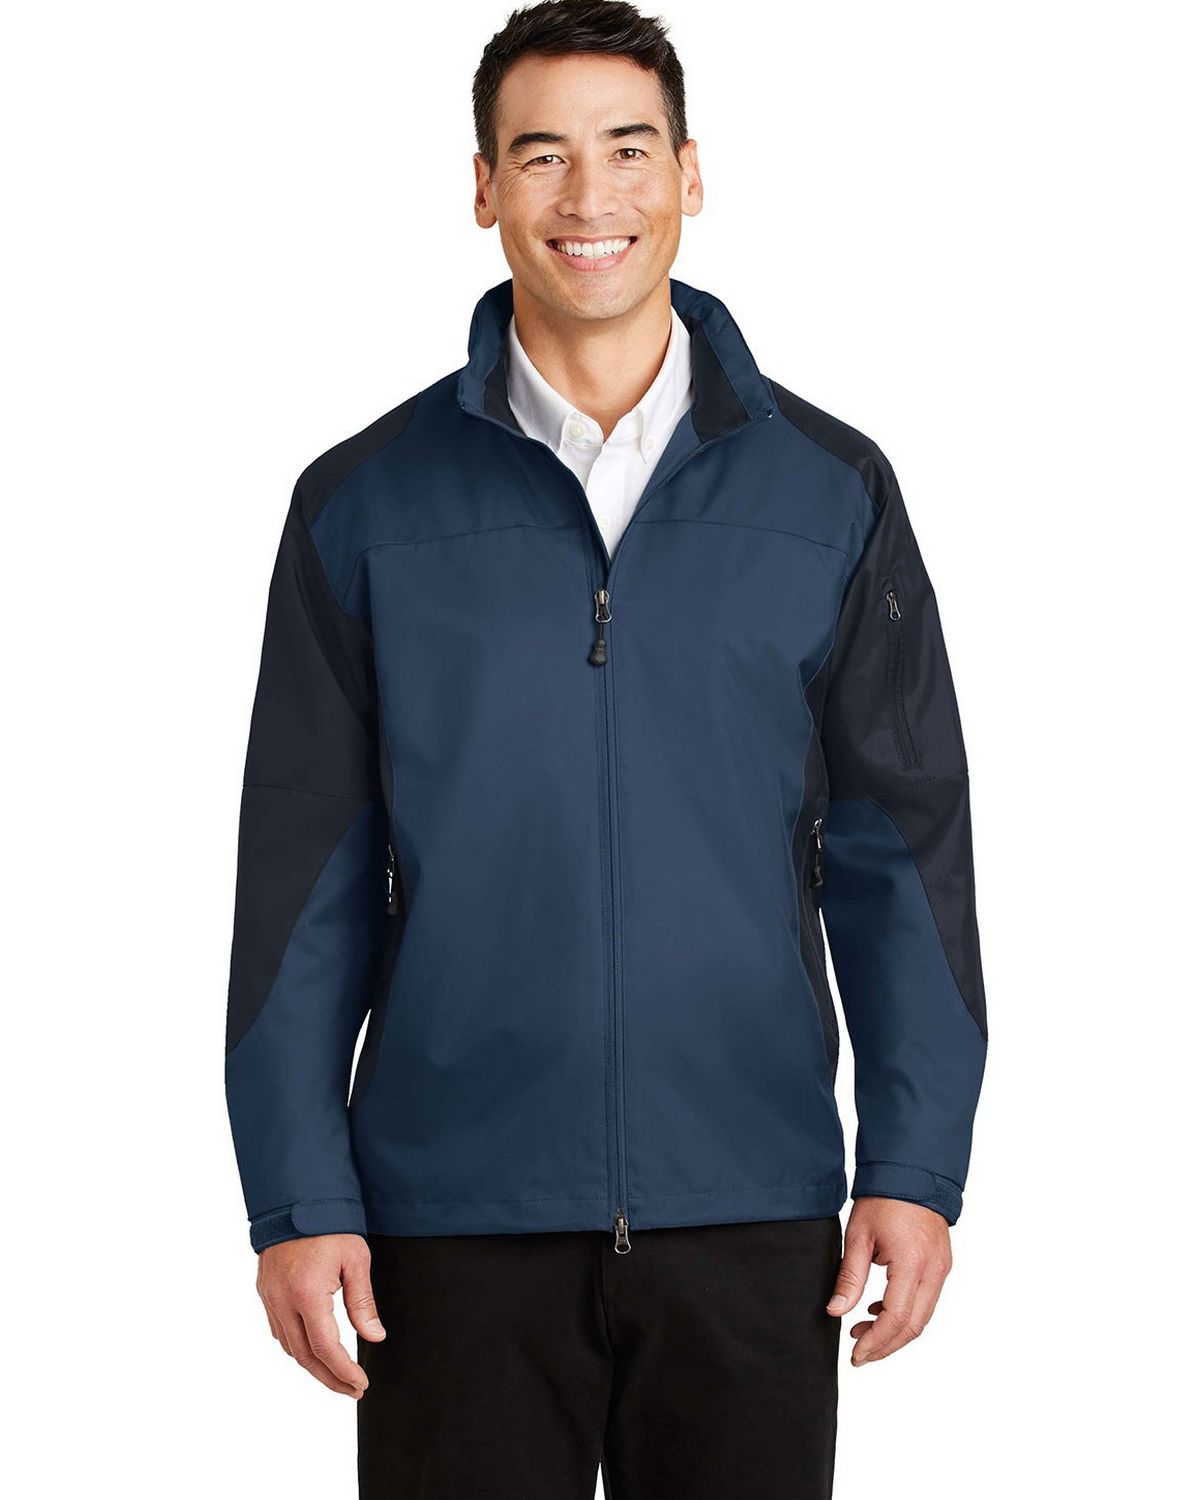 Port Authority J754R Challenger Jacket with Reflective Taping ...